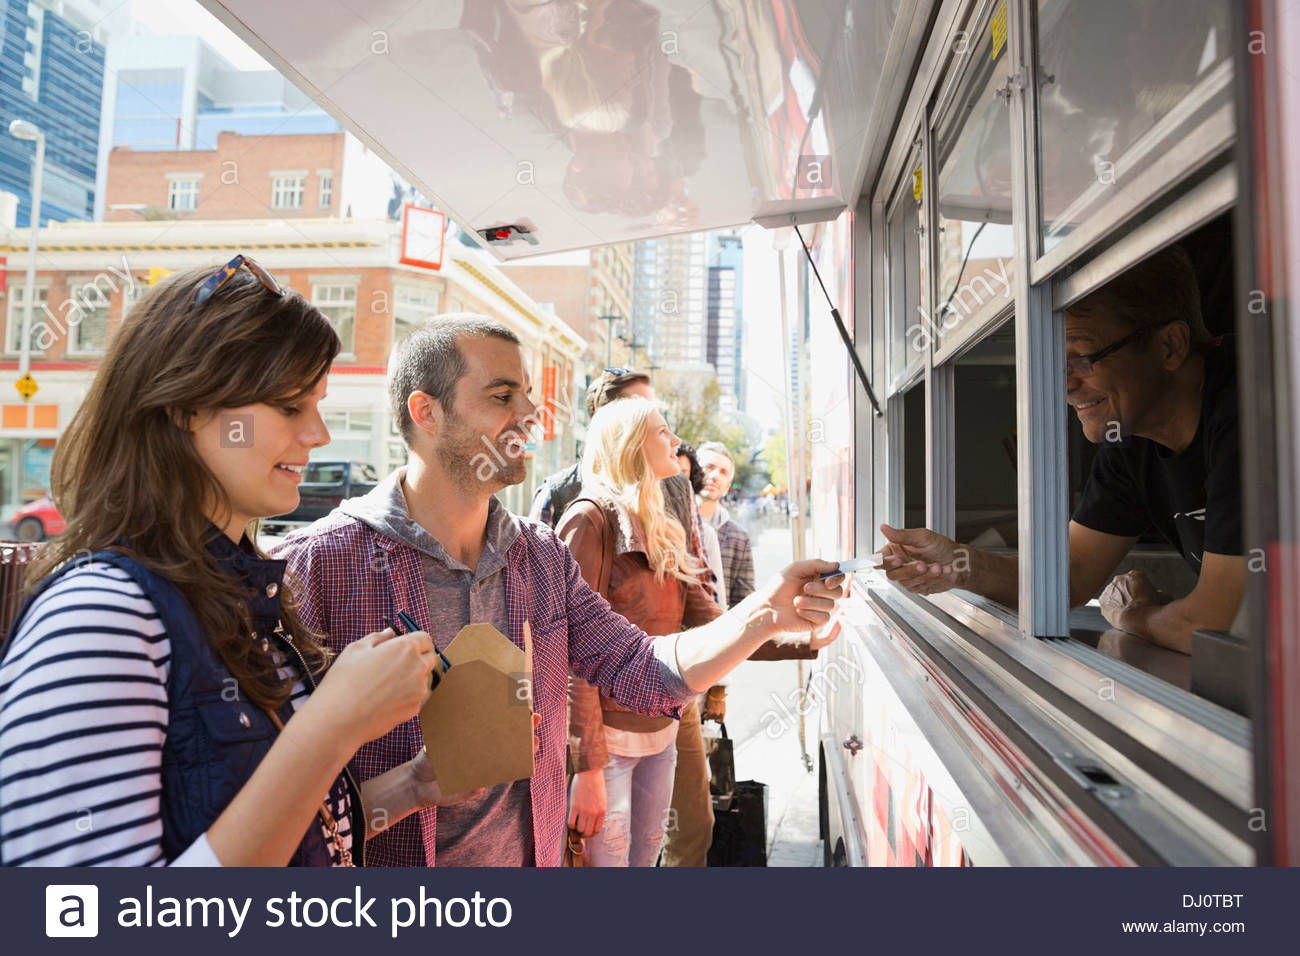 Couple paying for takeaway food Stock Photo